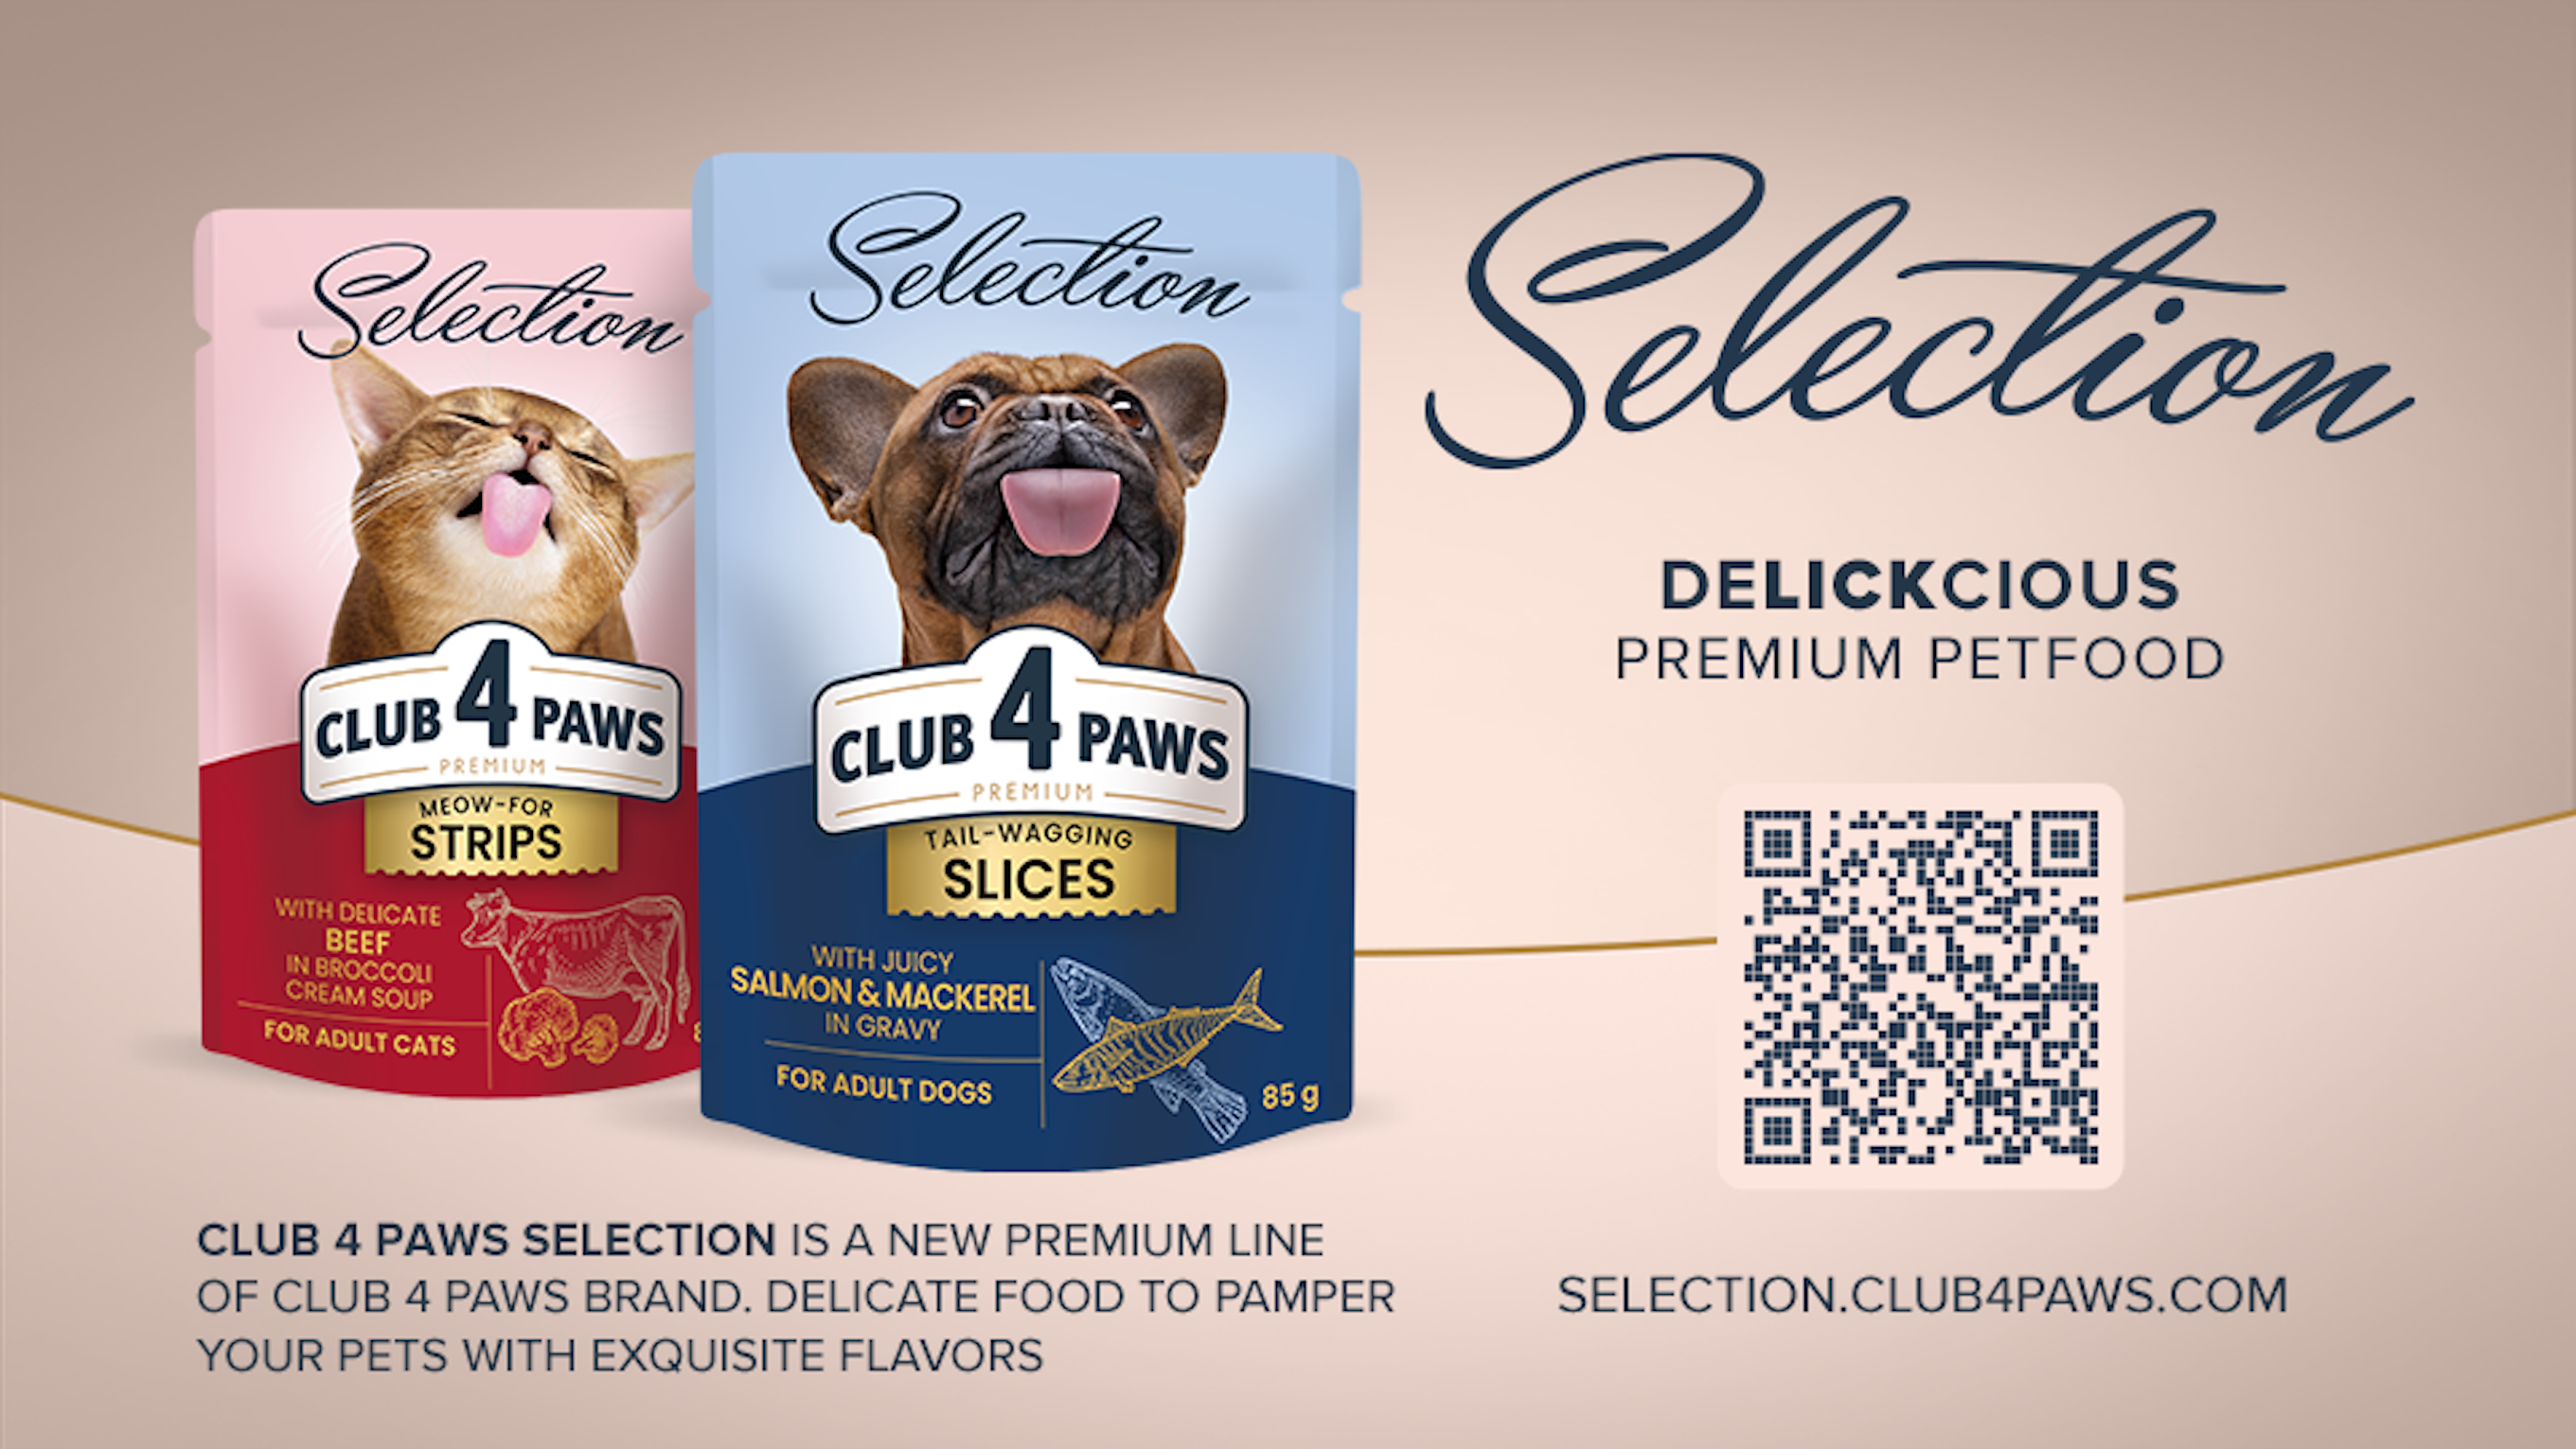 CLUB 4 PAWS SELECTION